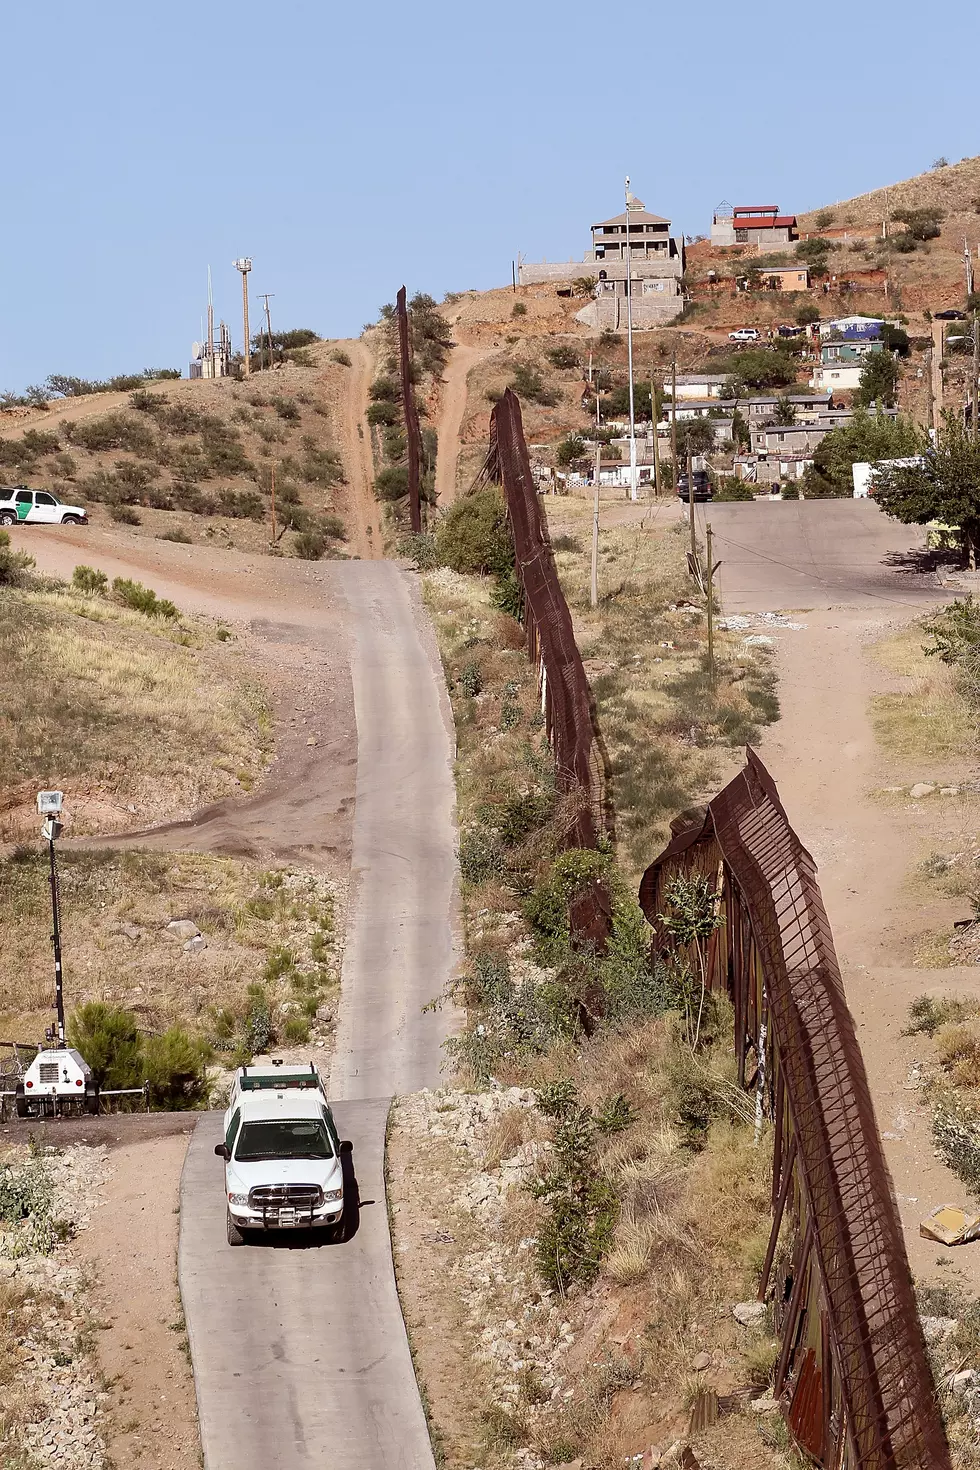 Arizona Seeks Online Donations to Build Border Fence, Should Texas Do The Same